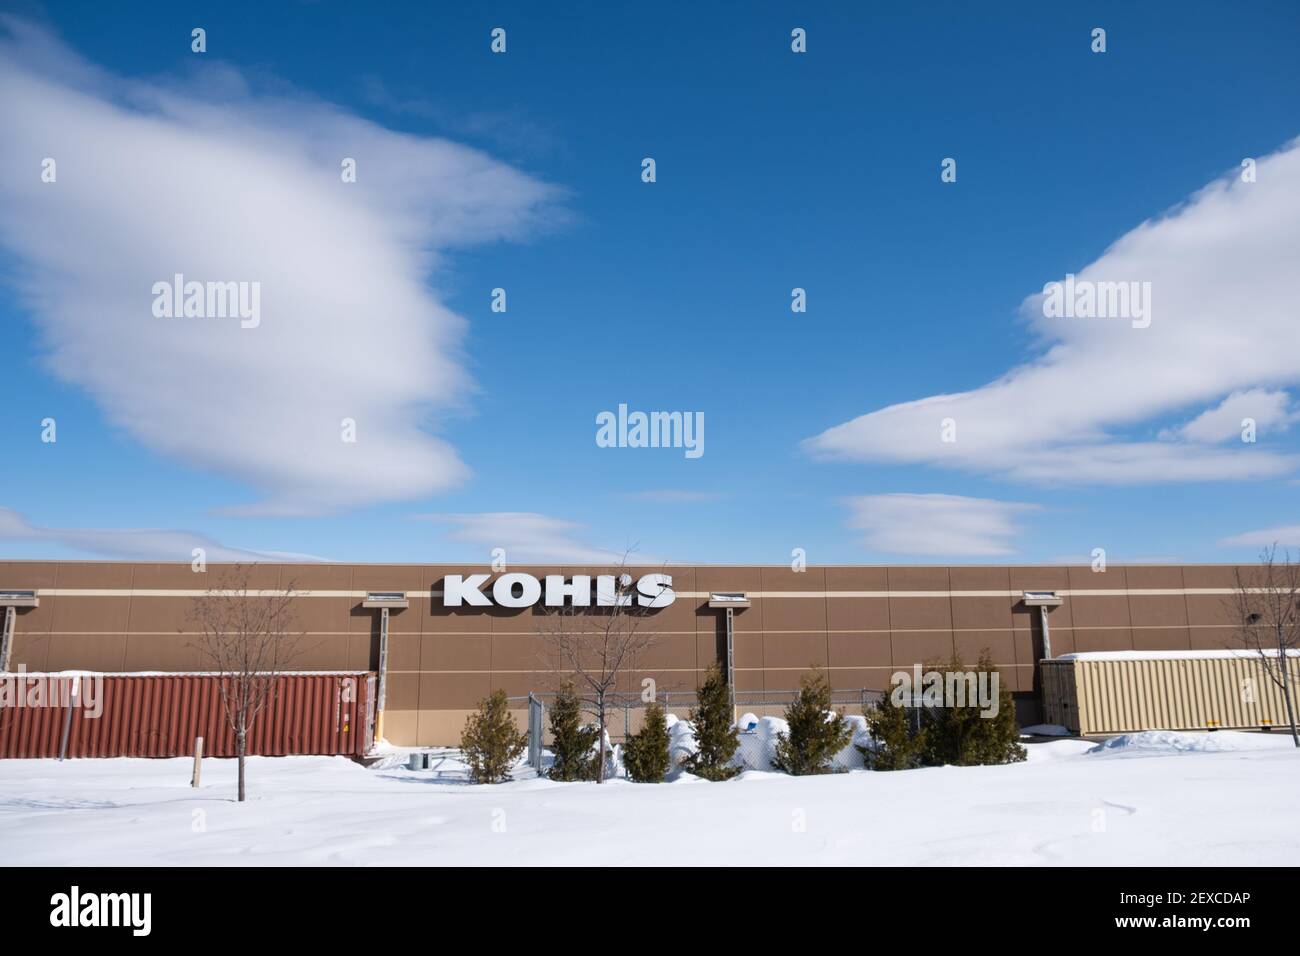 Kohl's department store corporate logo in extra-bold Helvetica font on the side of a kohl's store, Berlin, VT, USA. Stock Photo